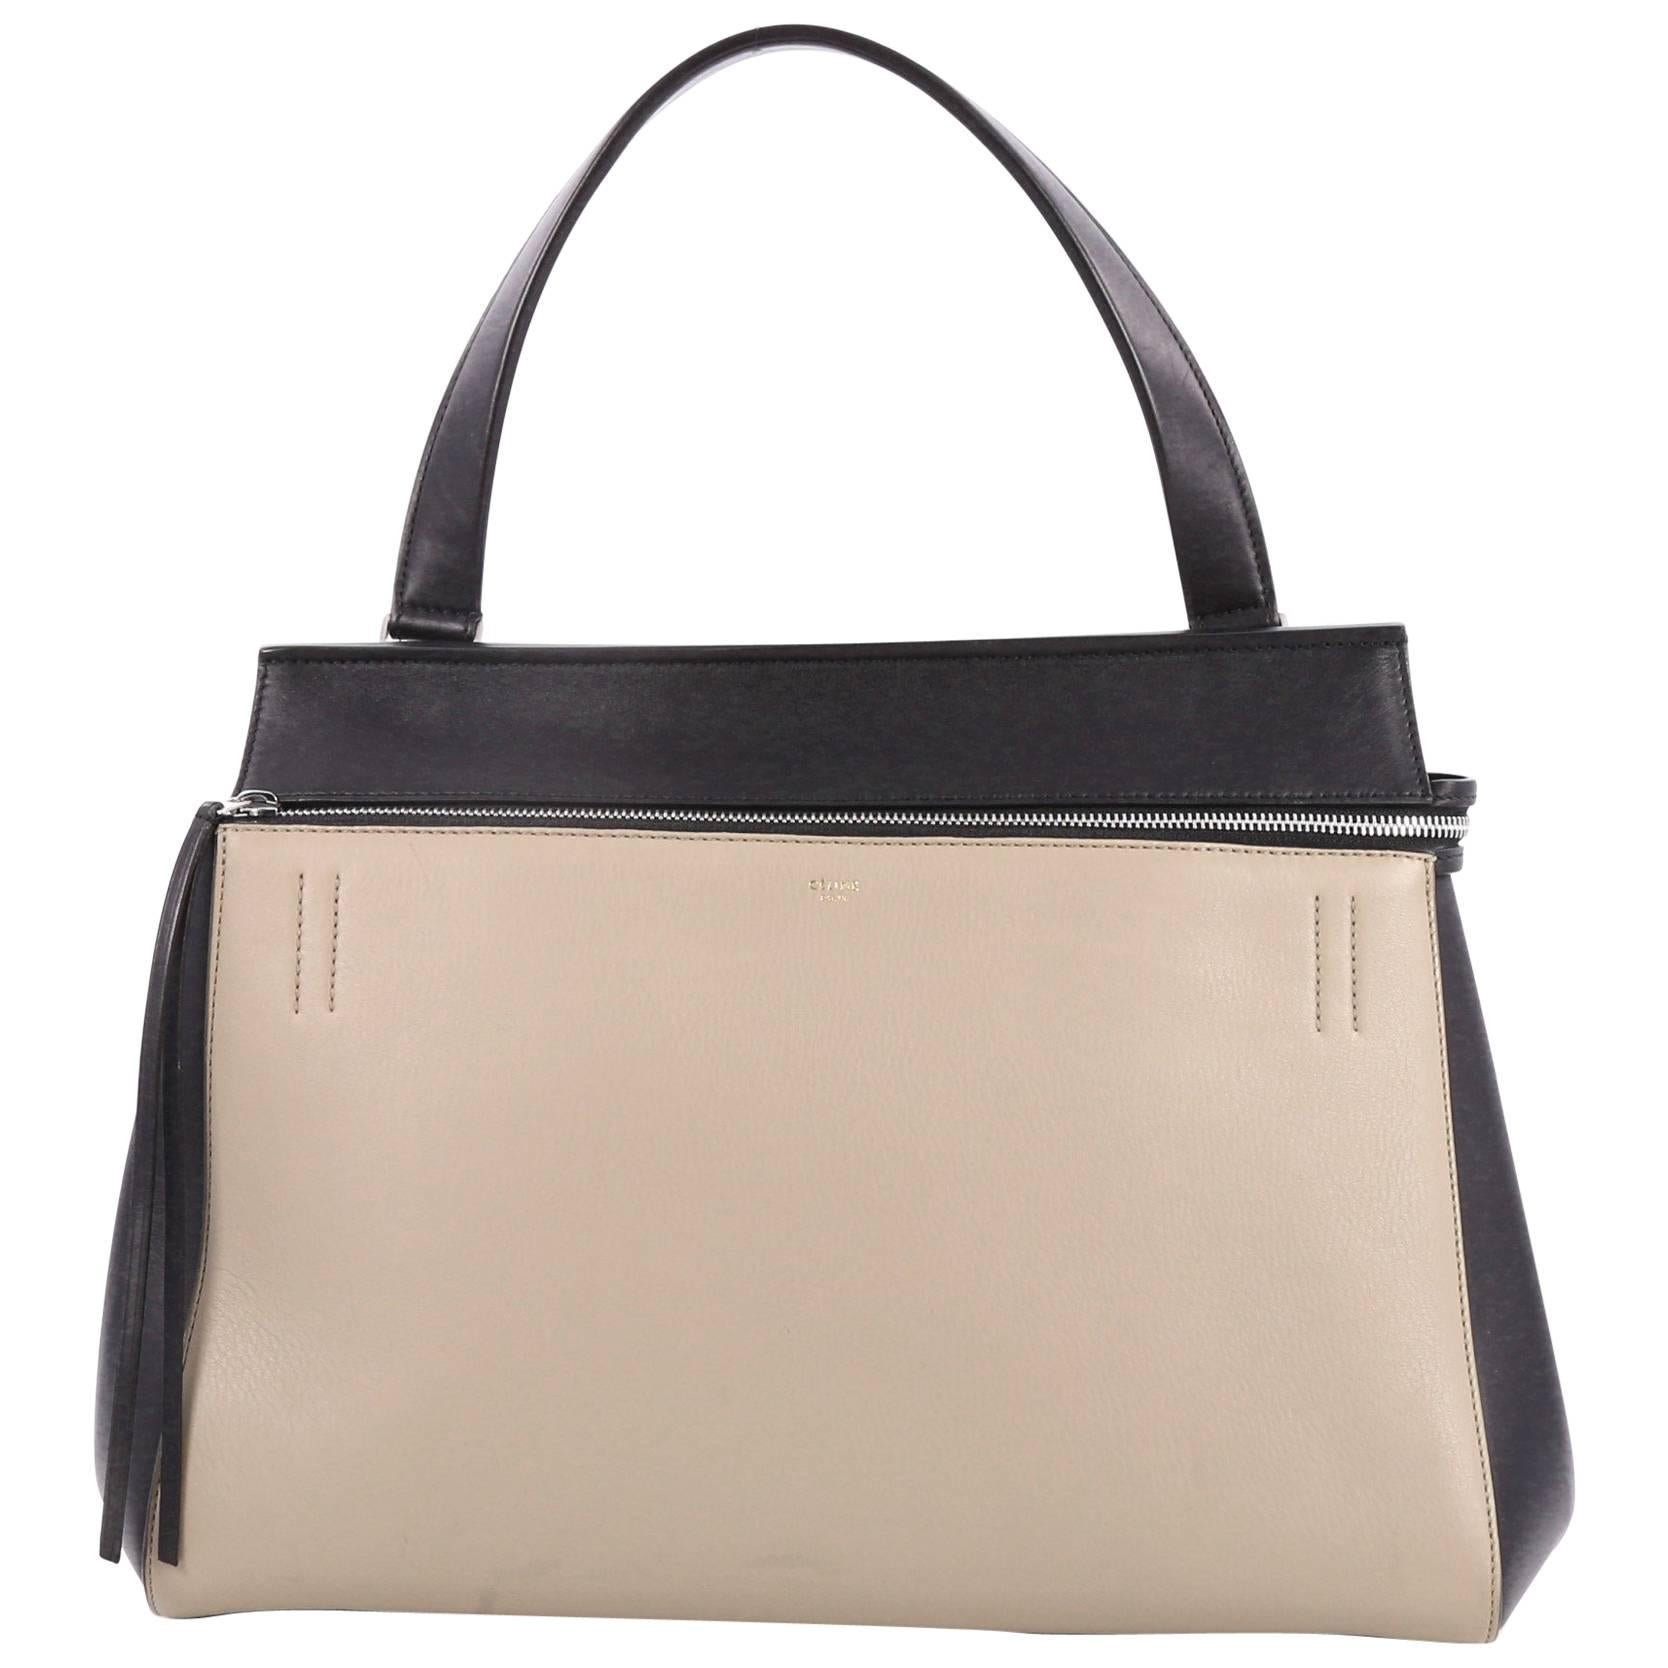 Celine Edge Bag Leather Large is the quintessential